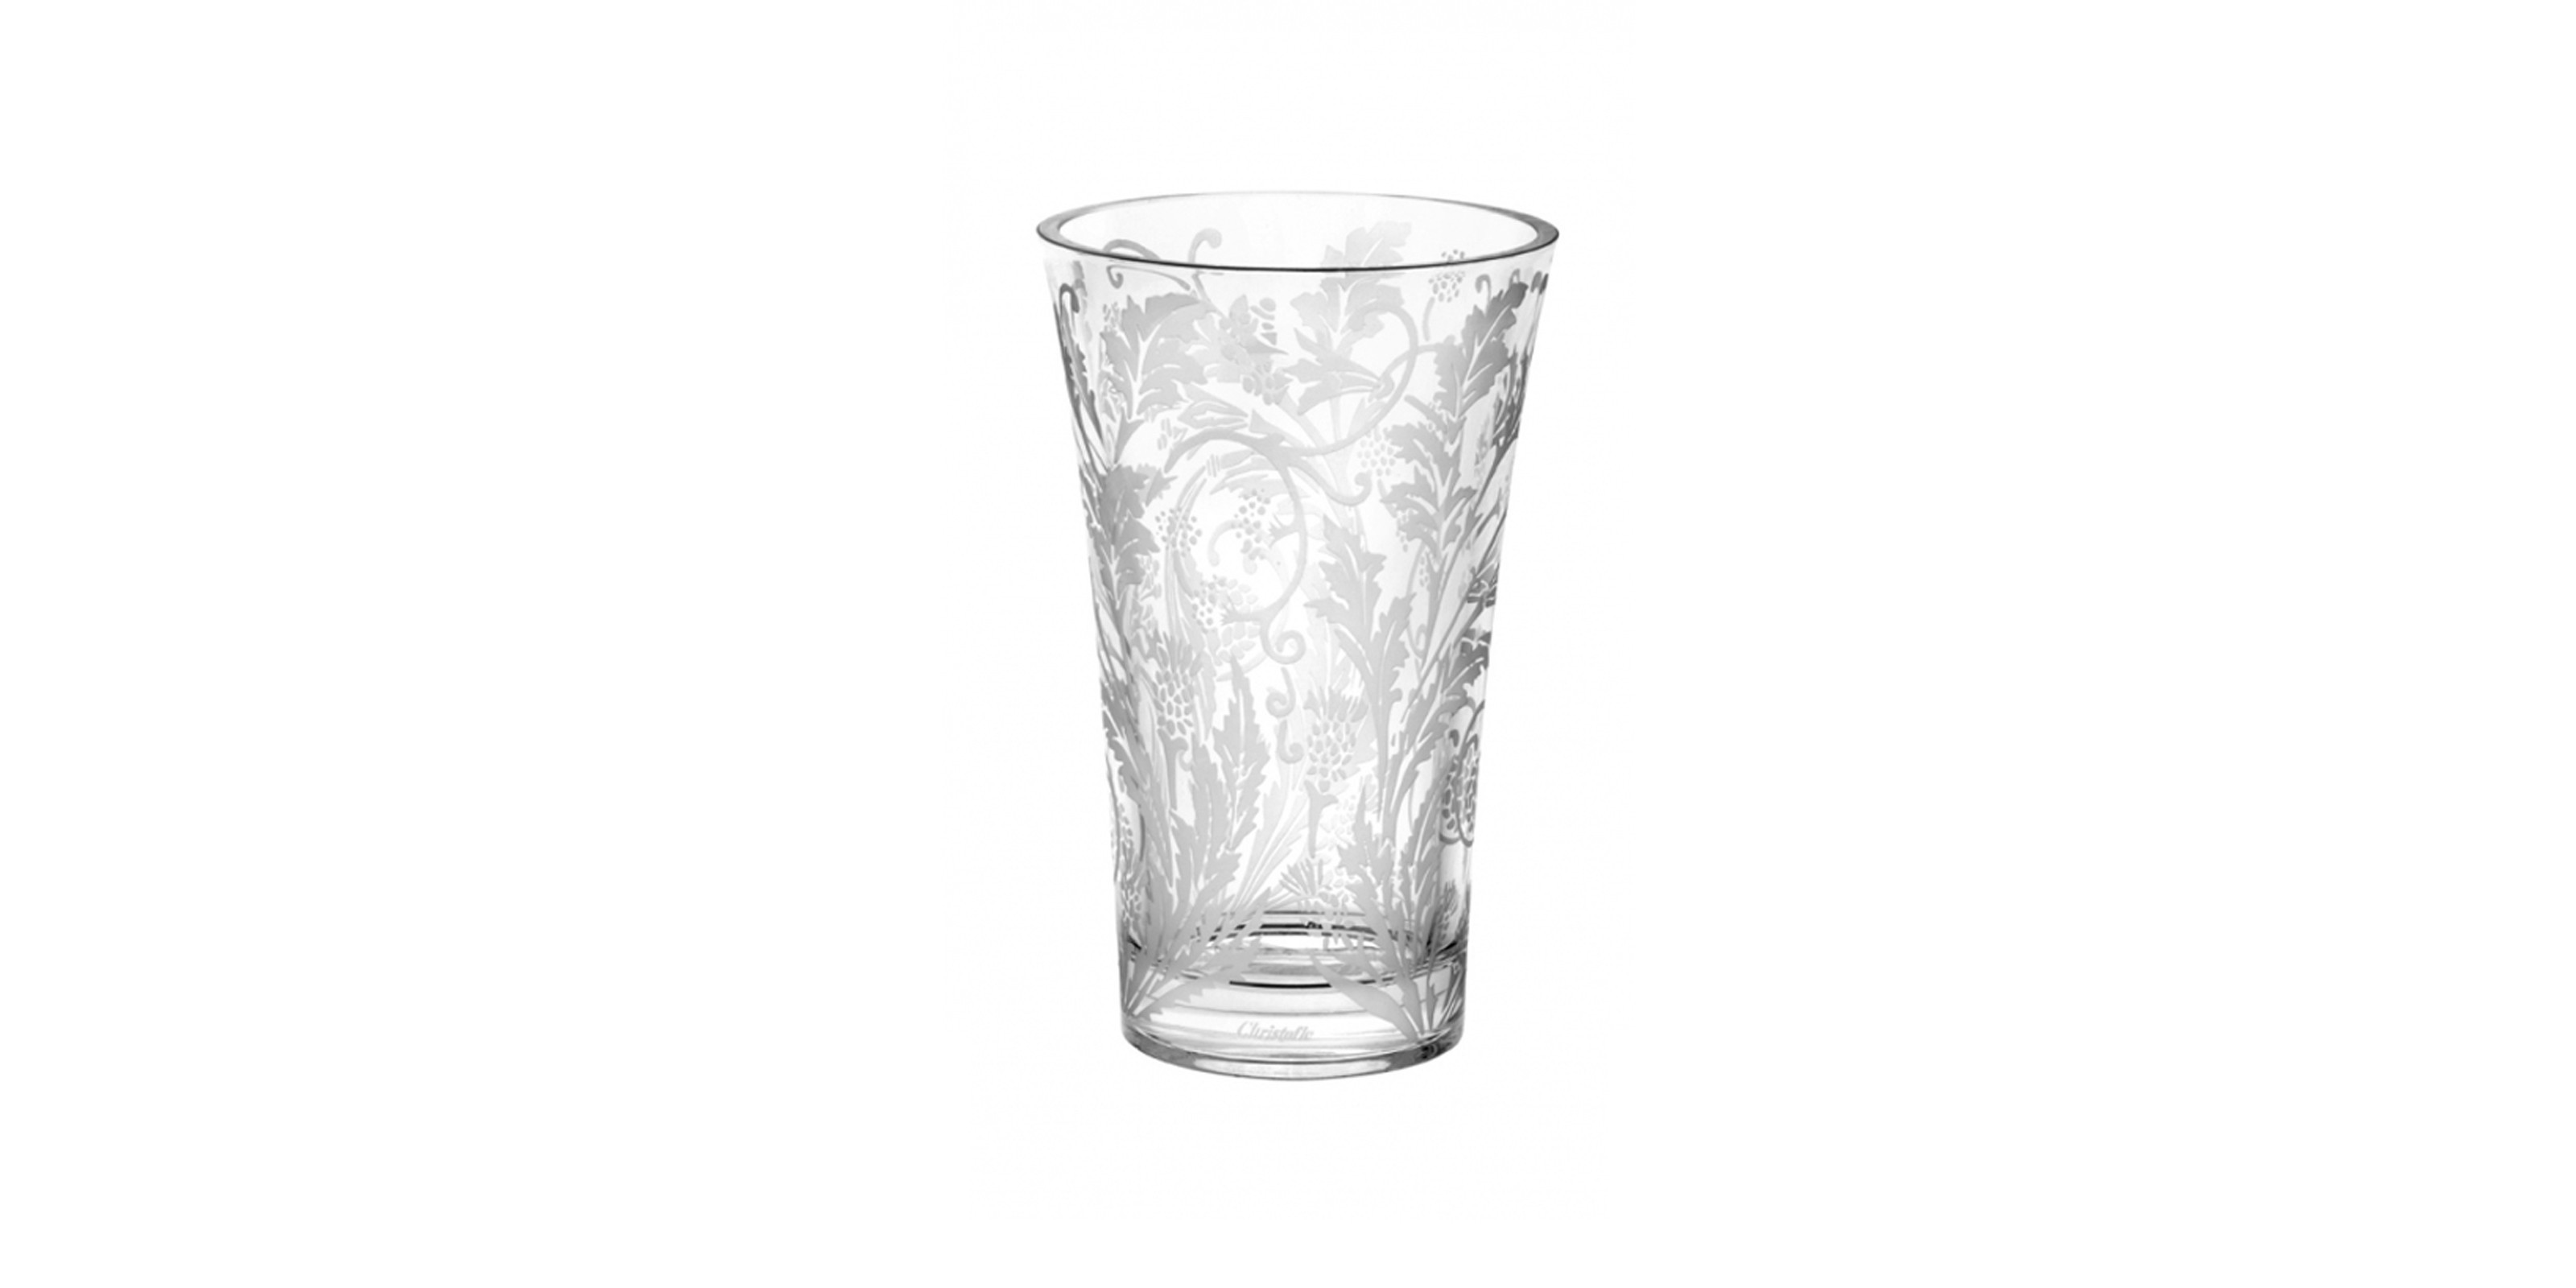 20 attractive Christofle Uni Vase 2024 free download christofle uni vase of floral print crystal vase marly christofle throughout diminuer le zoom